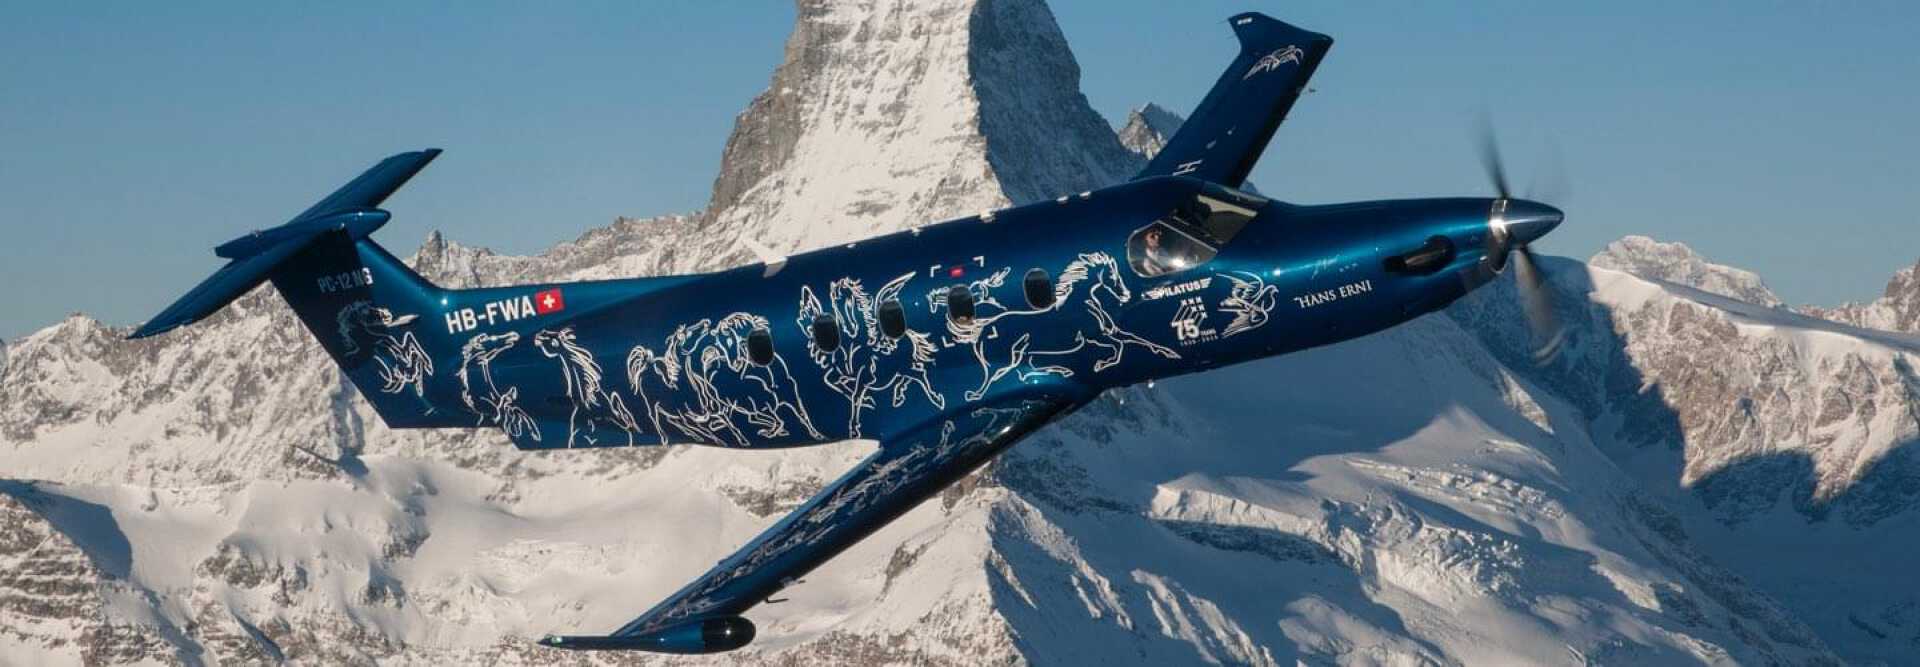 Blue Pilatus PC-12 turboprop with white drowing flying over Swiss snowy mountains